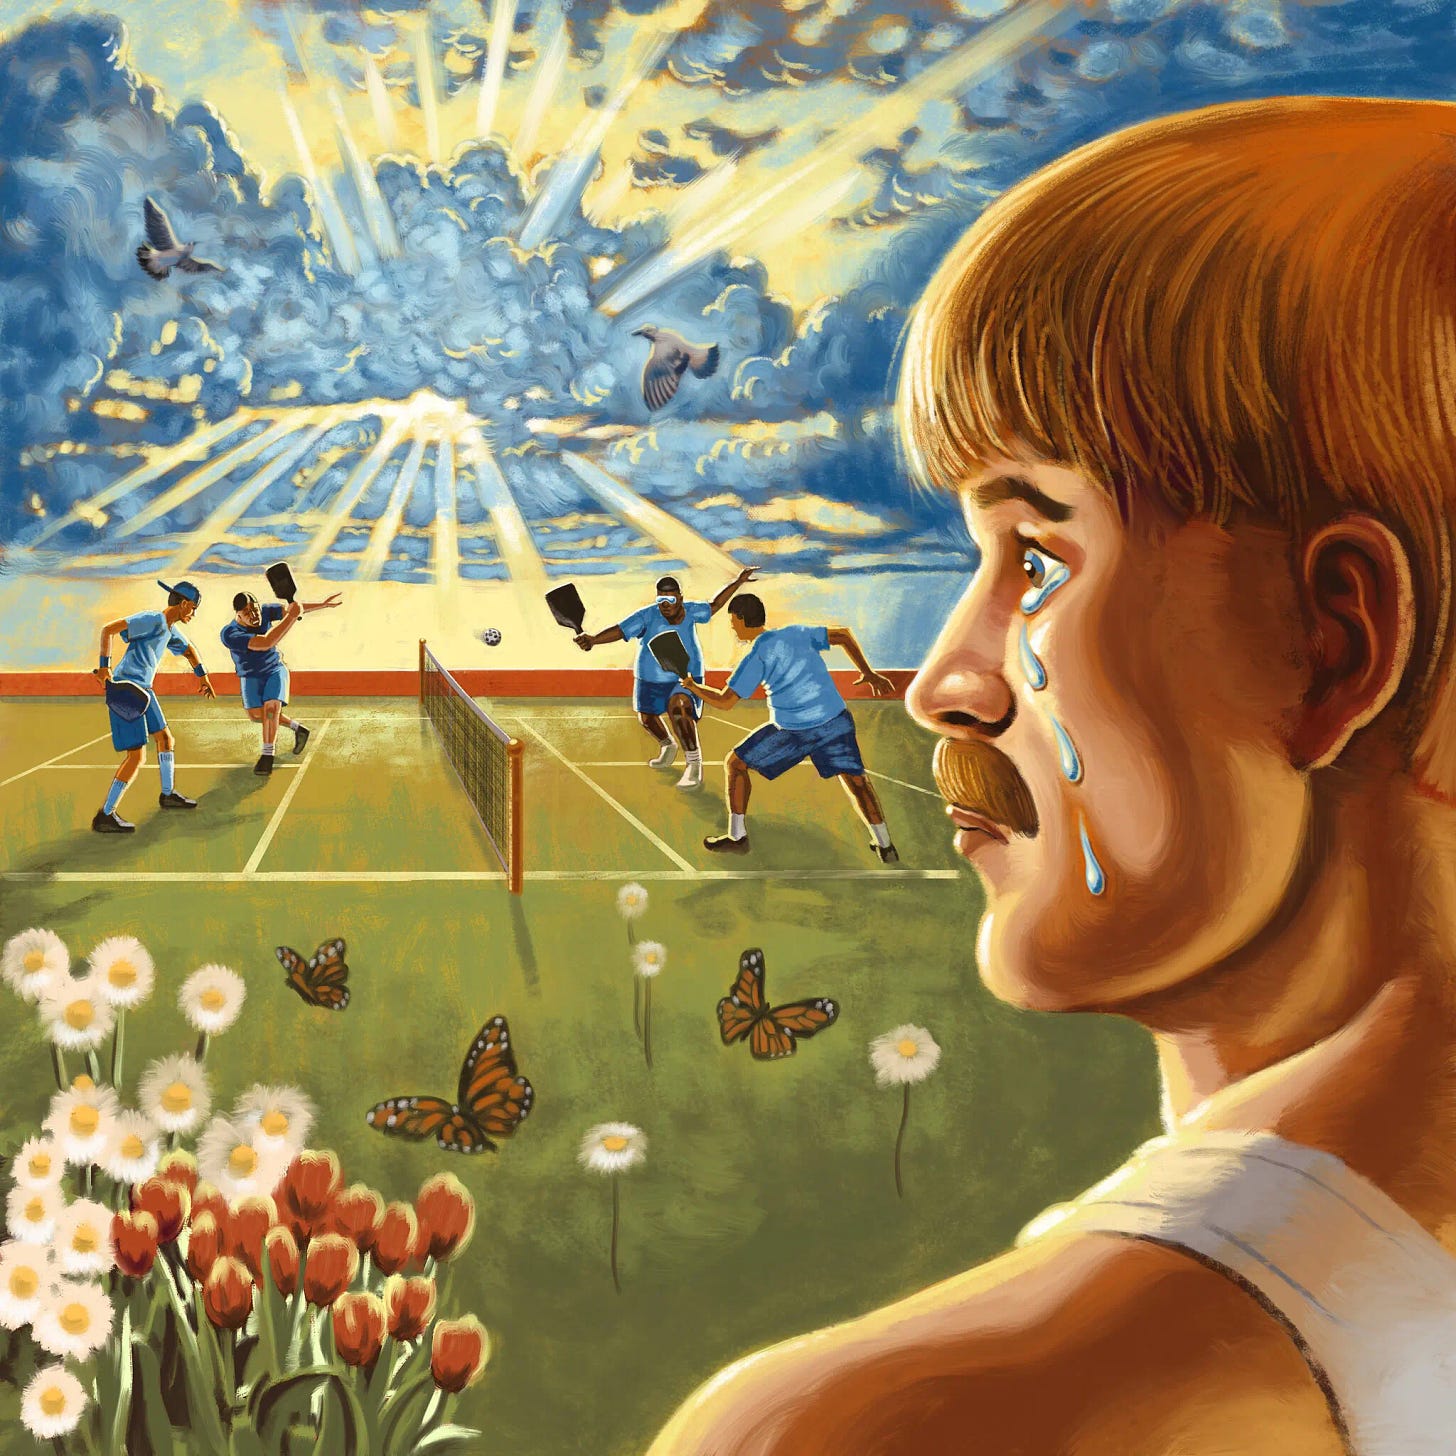 A painting of a man crying while looking at a court of four men playing pickleball while beams of sunlight shine down from behind a cloud.